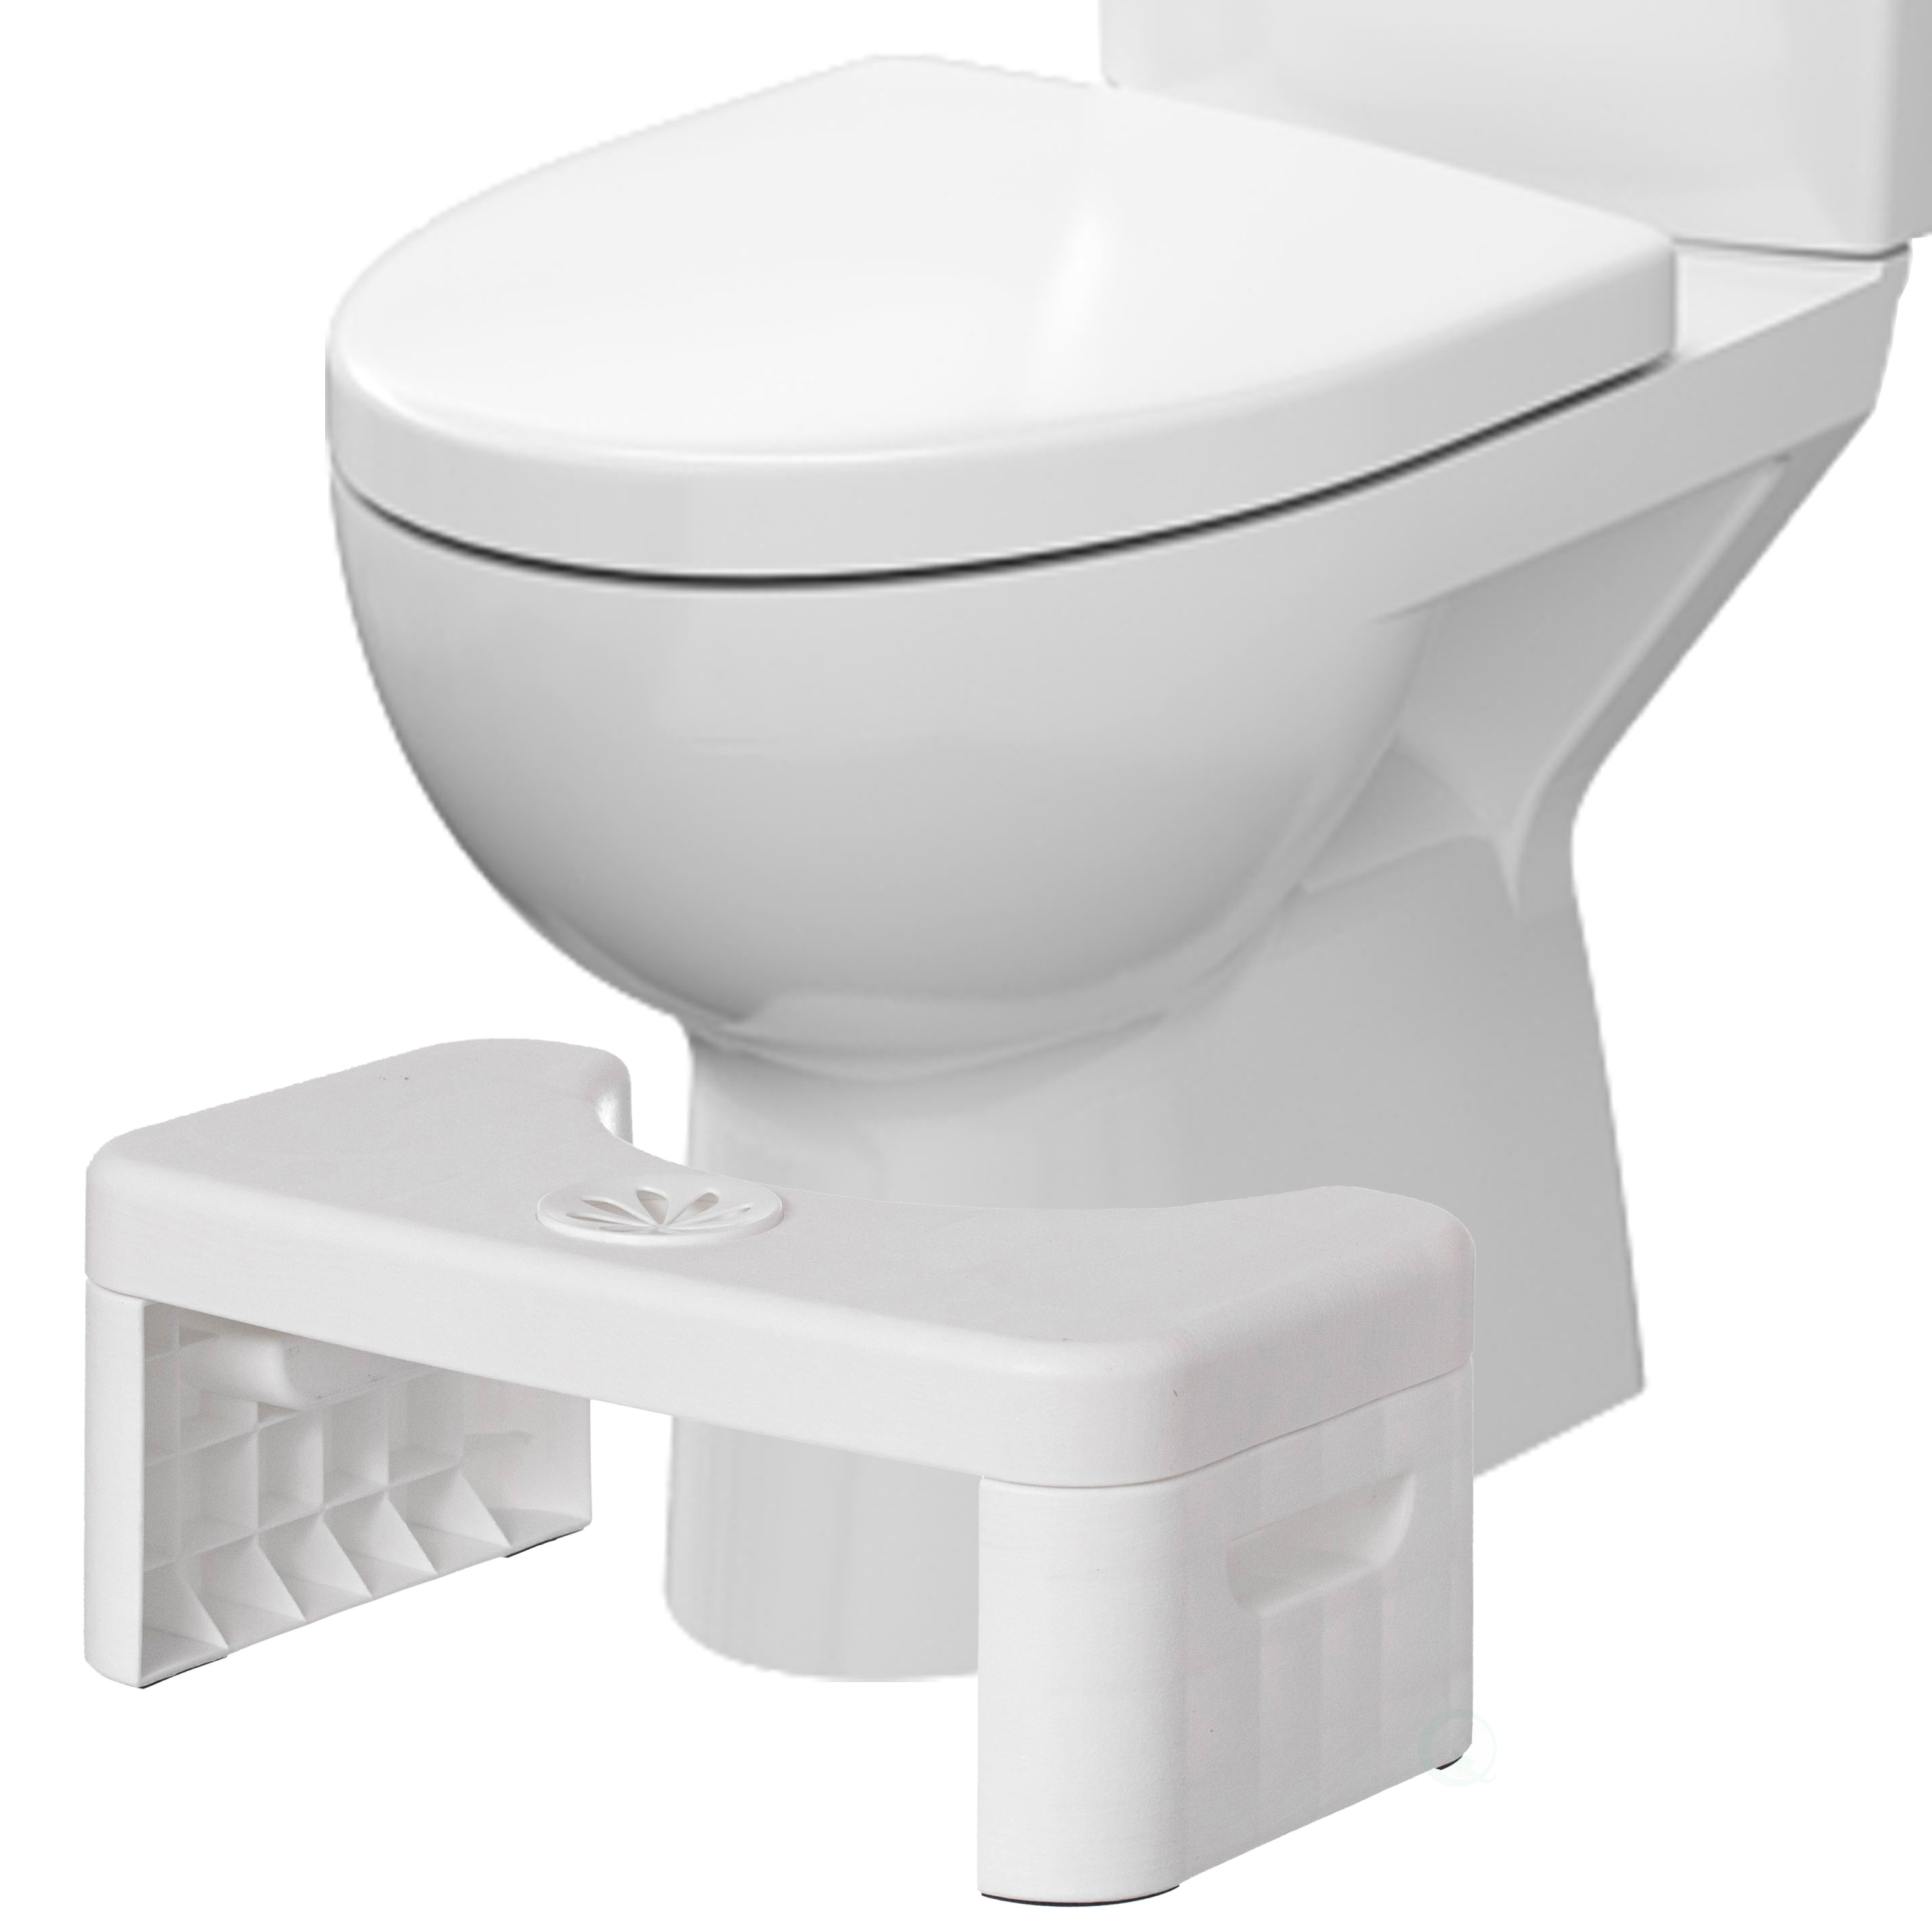 Portable Squatting Bathroom Potty Stool, White Poop Foot Stool, 6.25” Toilet Assistance Foldable Step Stool With Freshener Space